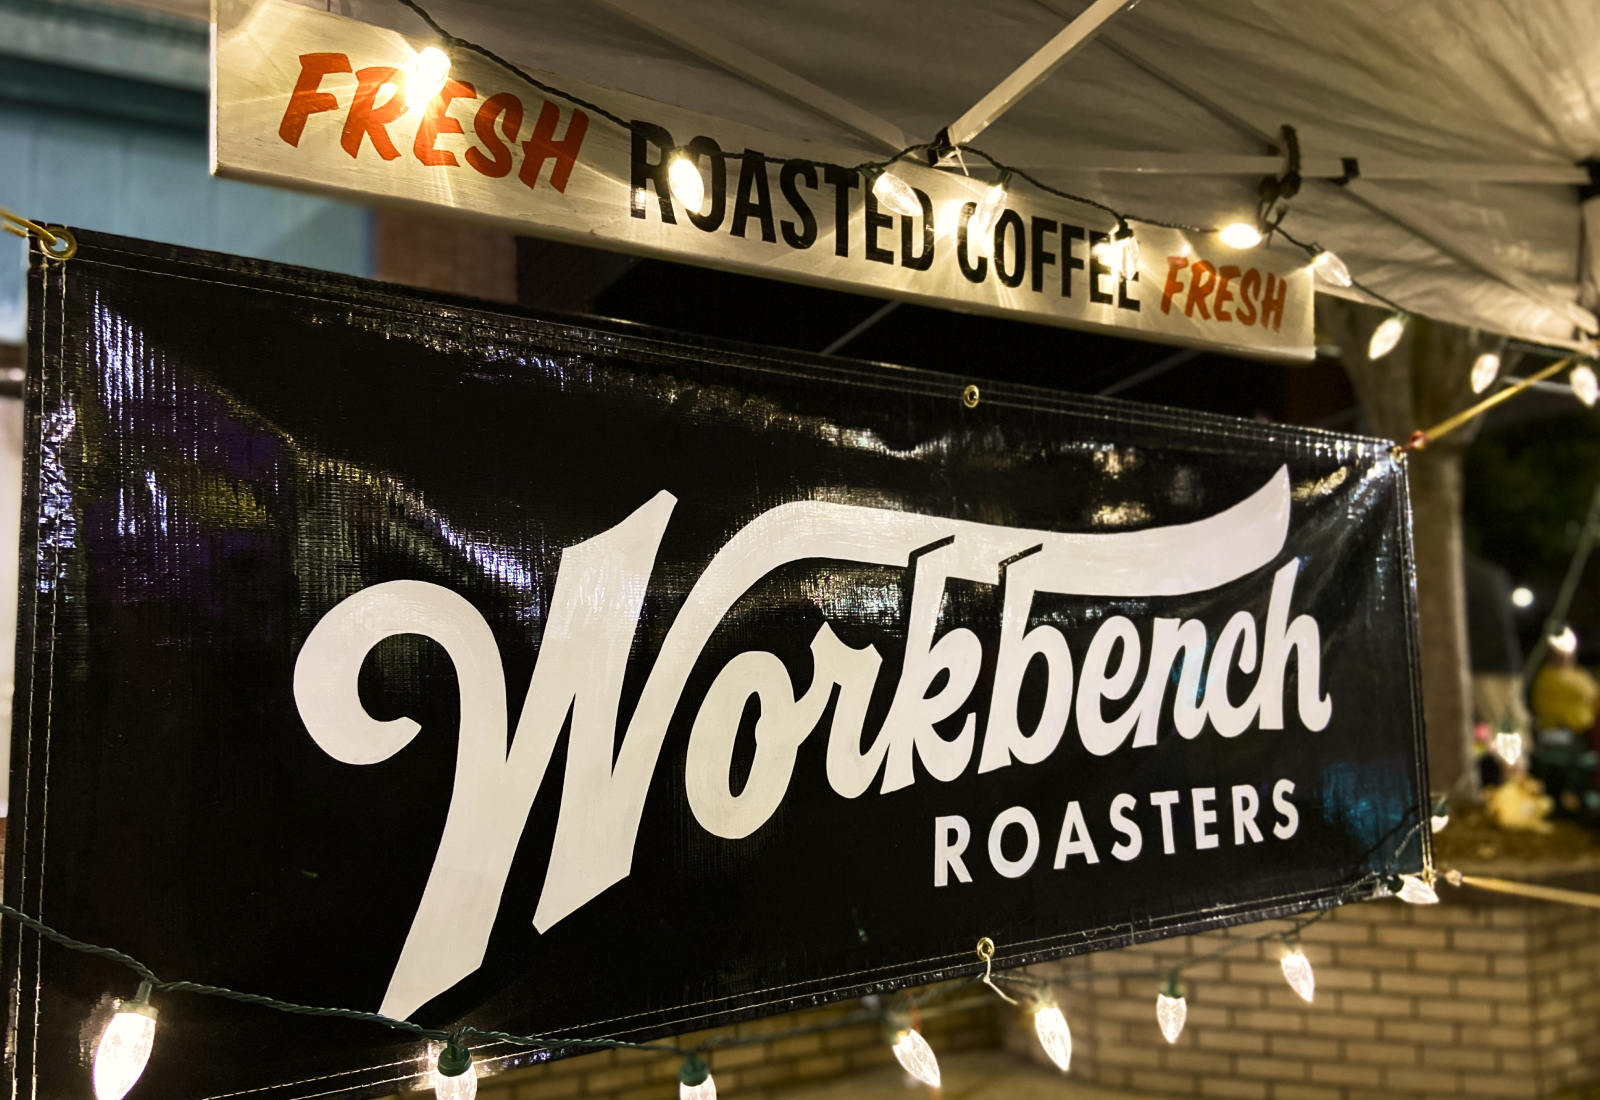 Hand Painted Banner for Markets | Workbench Roasters